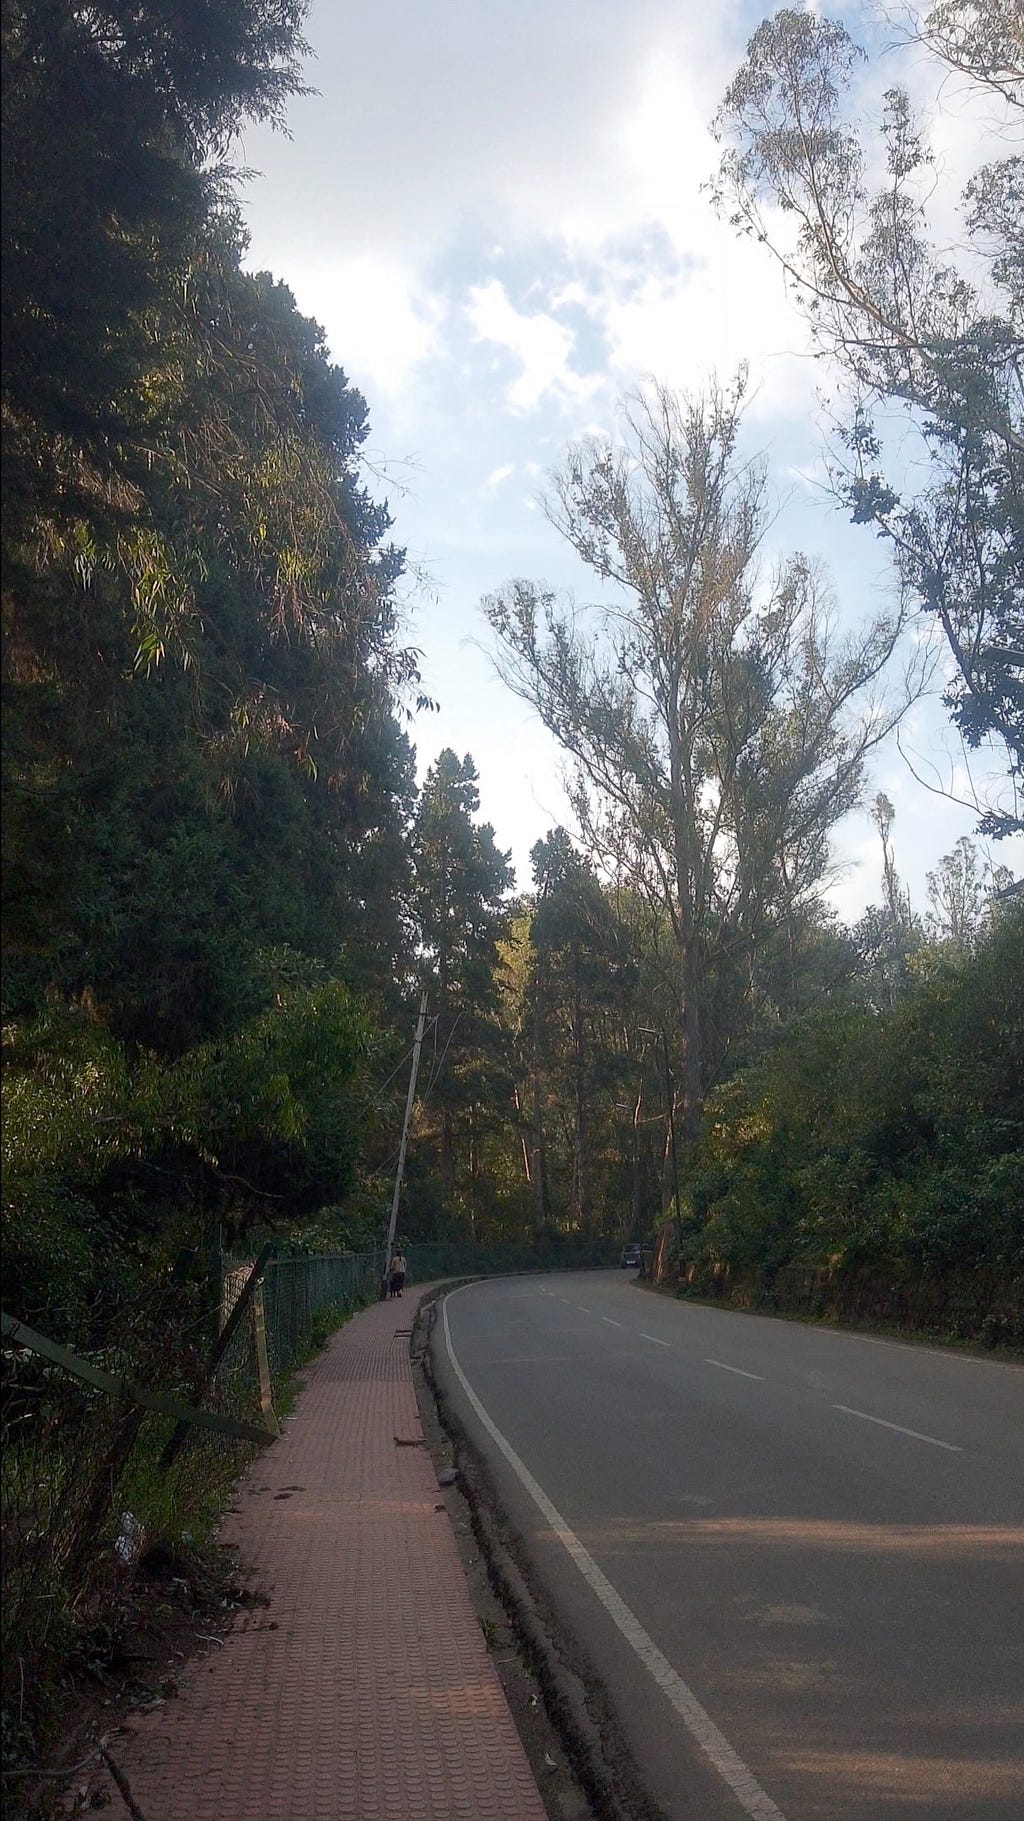 A curved road and footpath lined with trees and a fence. The trees are of many varieties, including some with needle like leaves. A few streaks of sunlight fall onto the road right in front, but most of the the road is shaded. Clouds are visible above and the sky is blue.